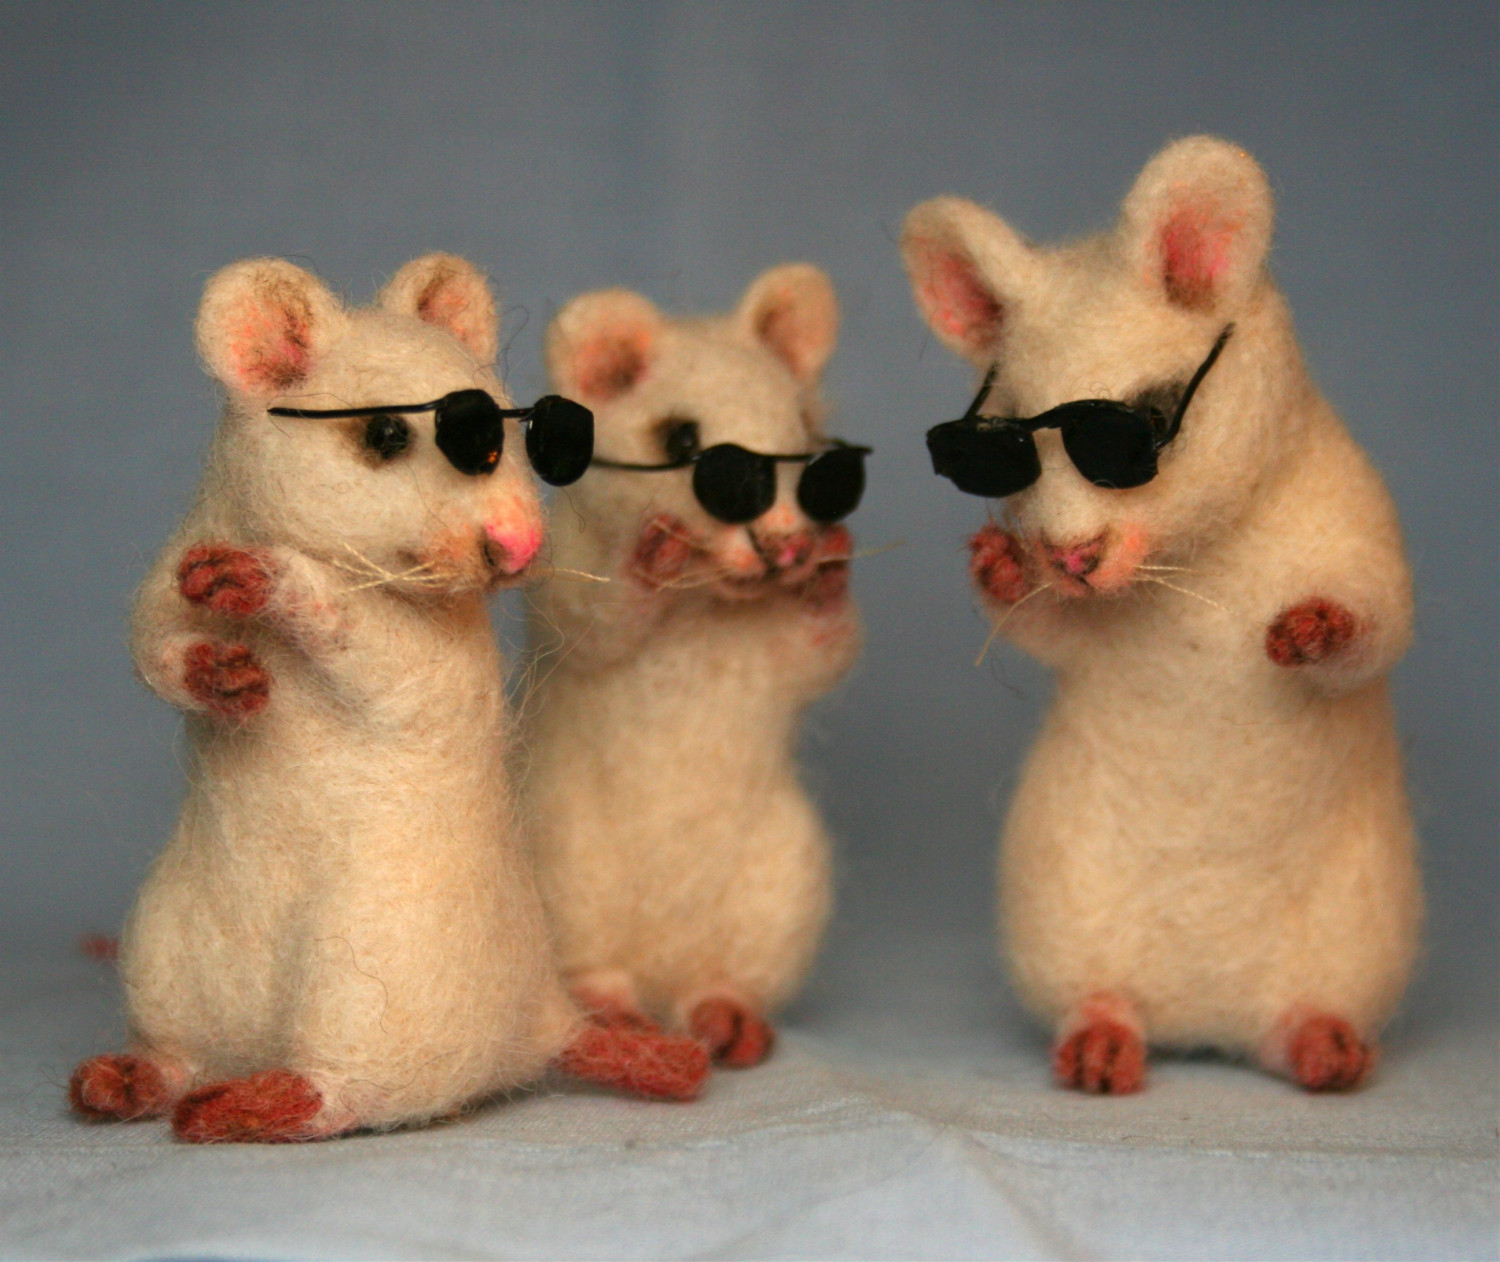 Three Blind Mice - the popular children's song refers to three men 

executed by Queen Mary I for plotting against her.